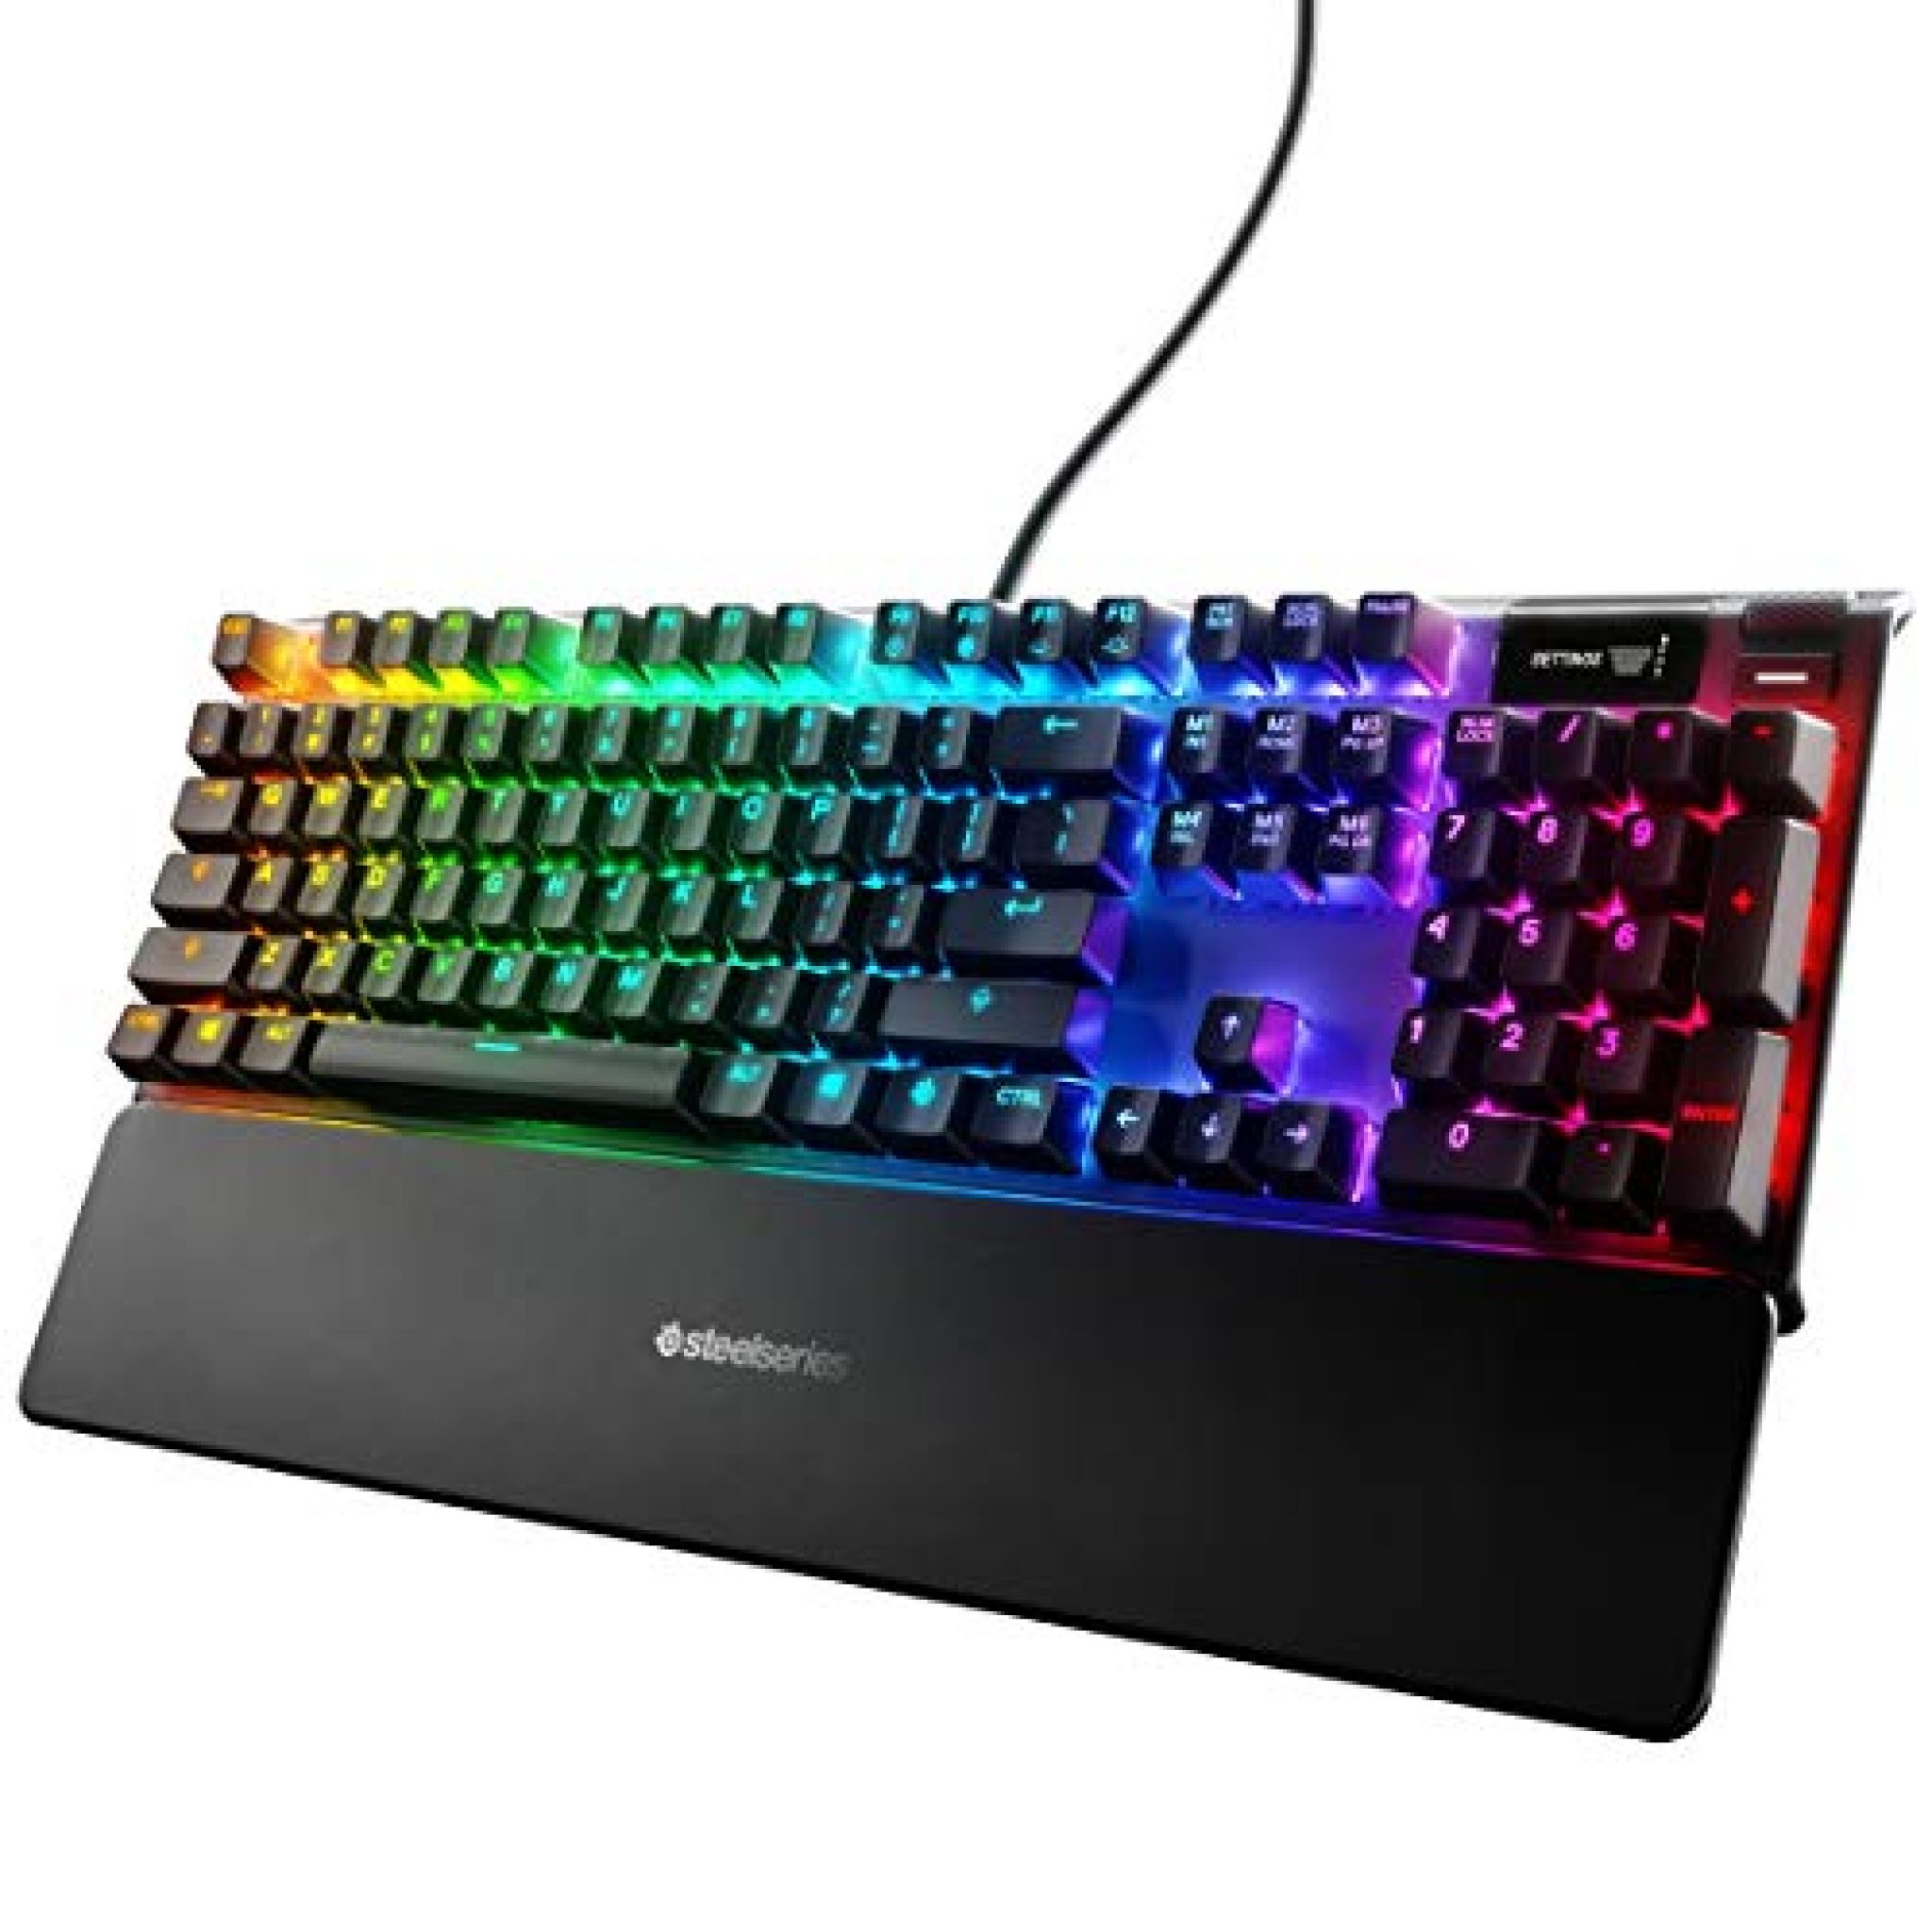 SteelSeries Apex Pro Mechanical Gaming Keyboard Adjustable Actuation Switches World’s